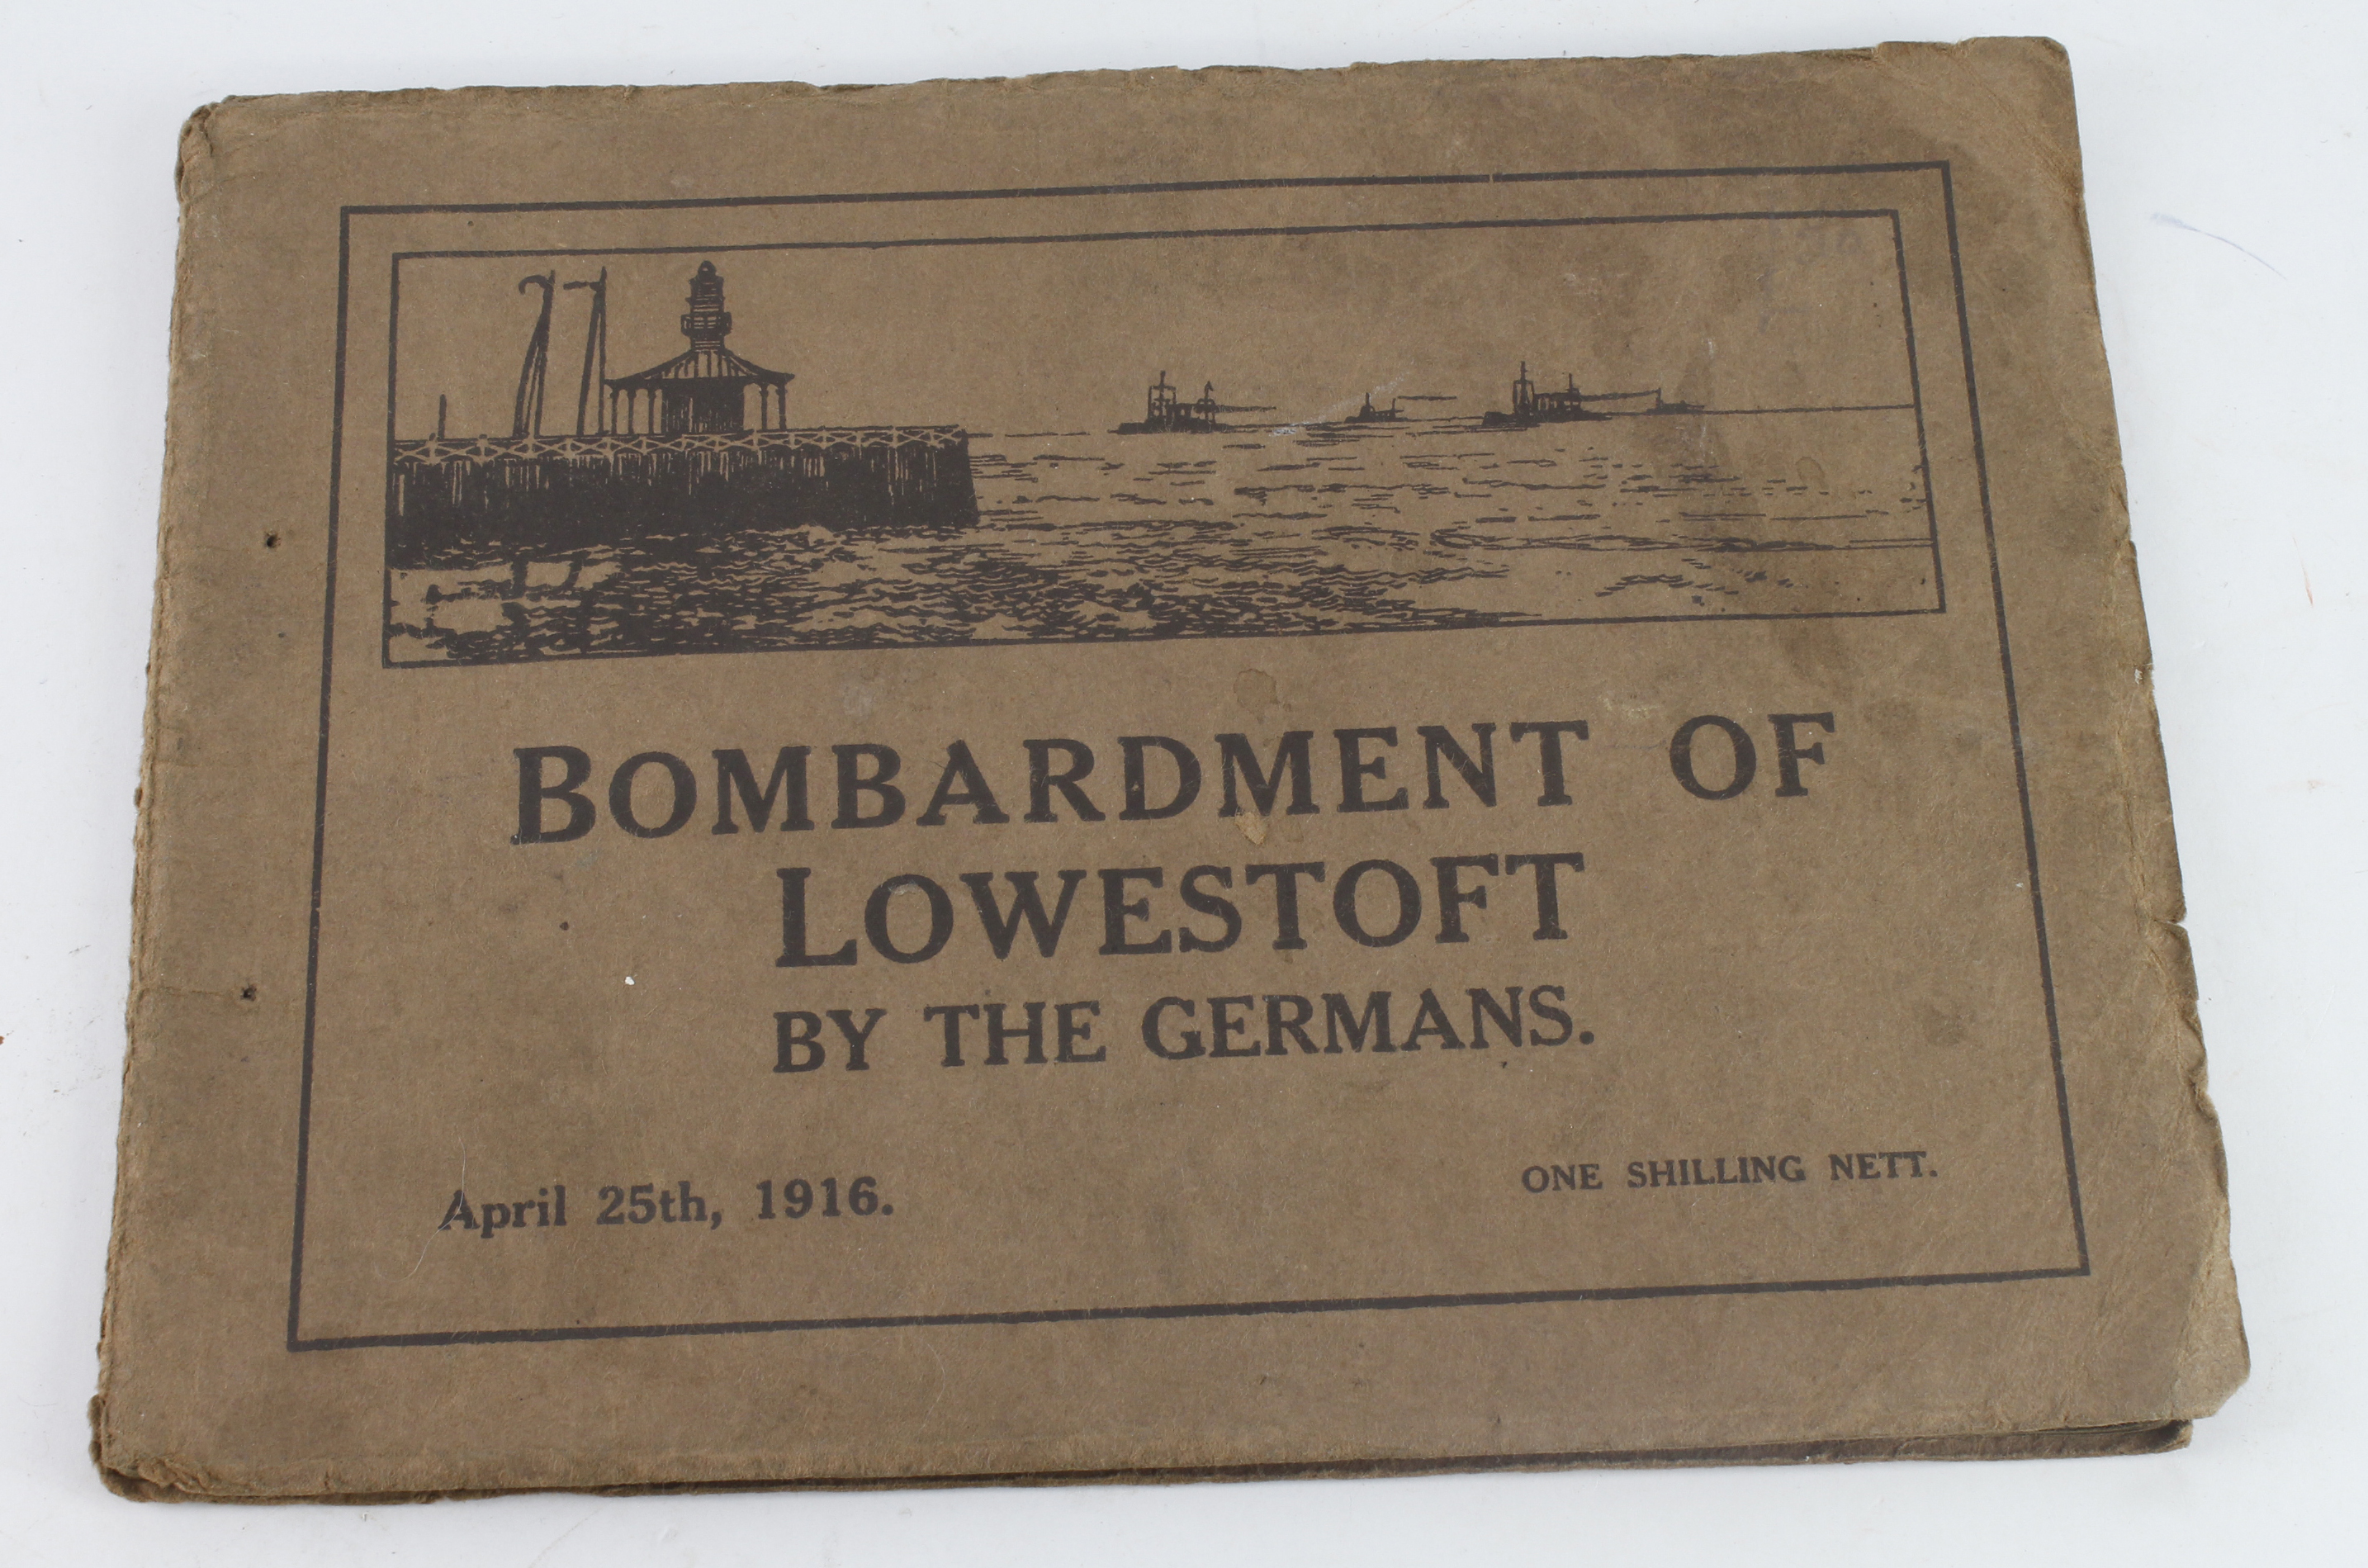 WW1 bombardment of Lowestoft by the Germans April 25th 1916 official booklet.